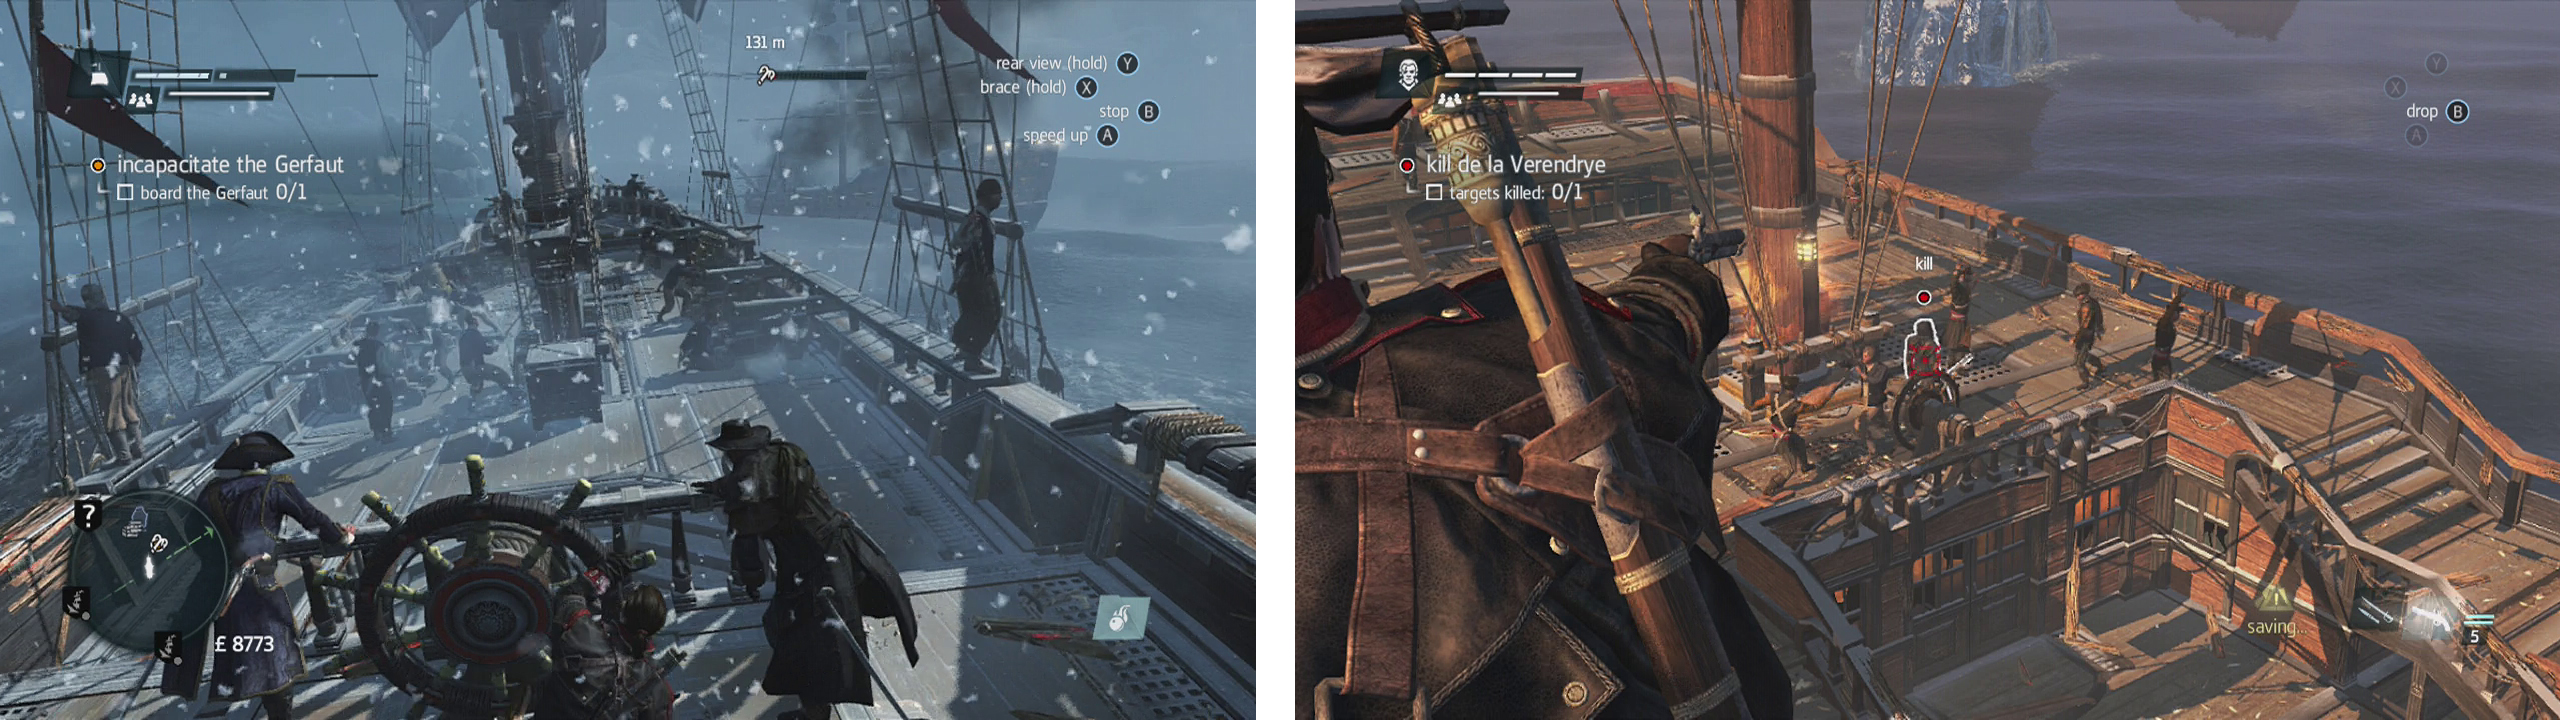 Initiate boarding (left) and then climb to the rigging and shoot the target (right) to earn the second optional objective.